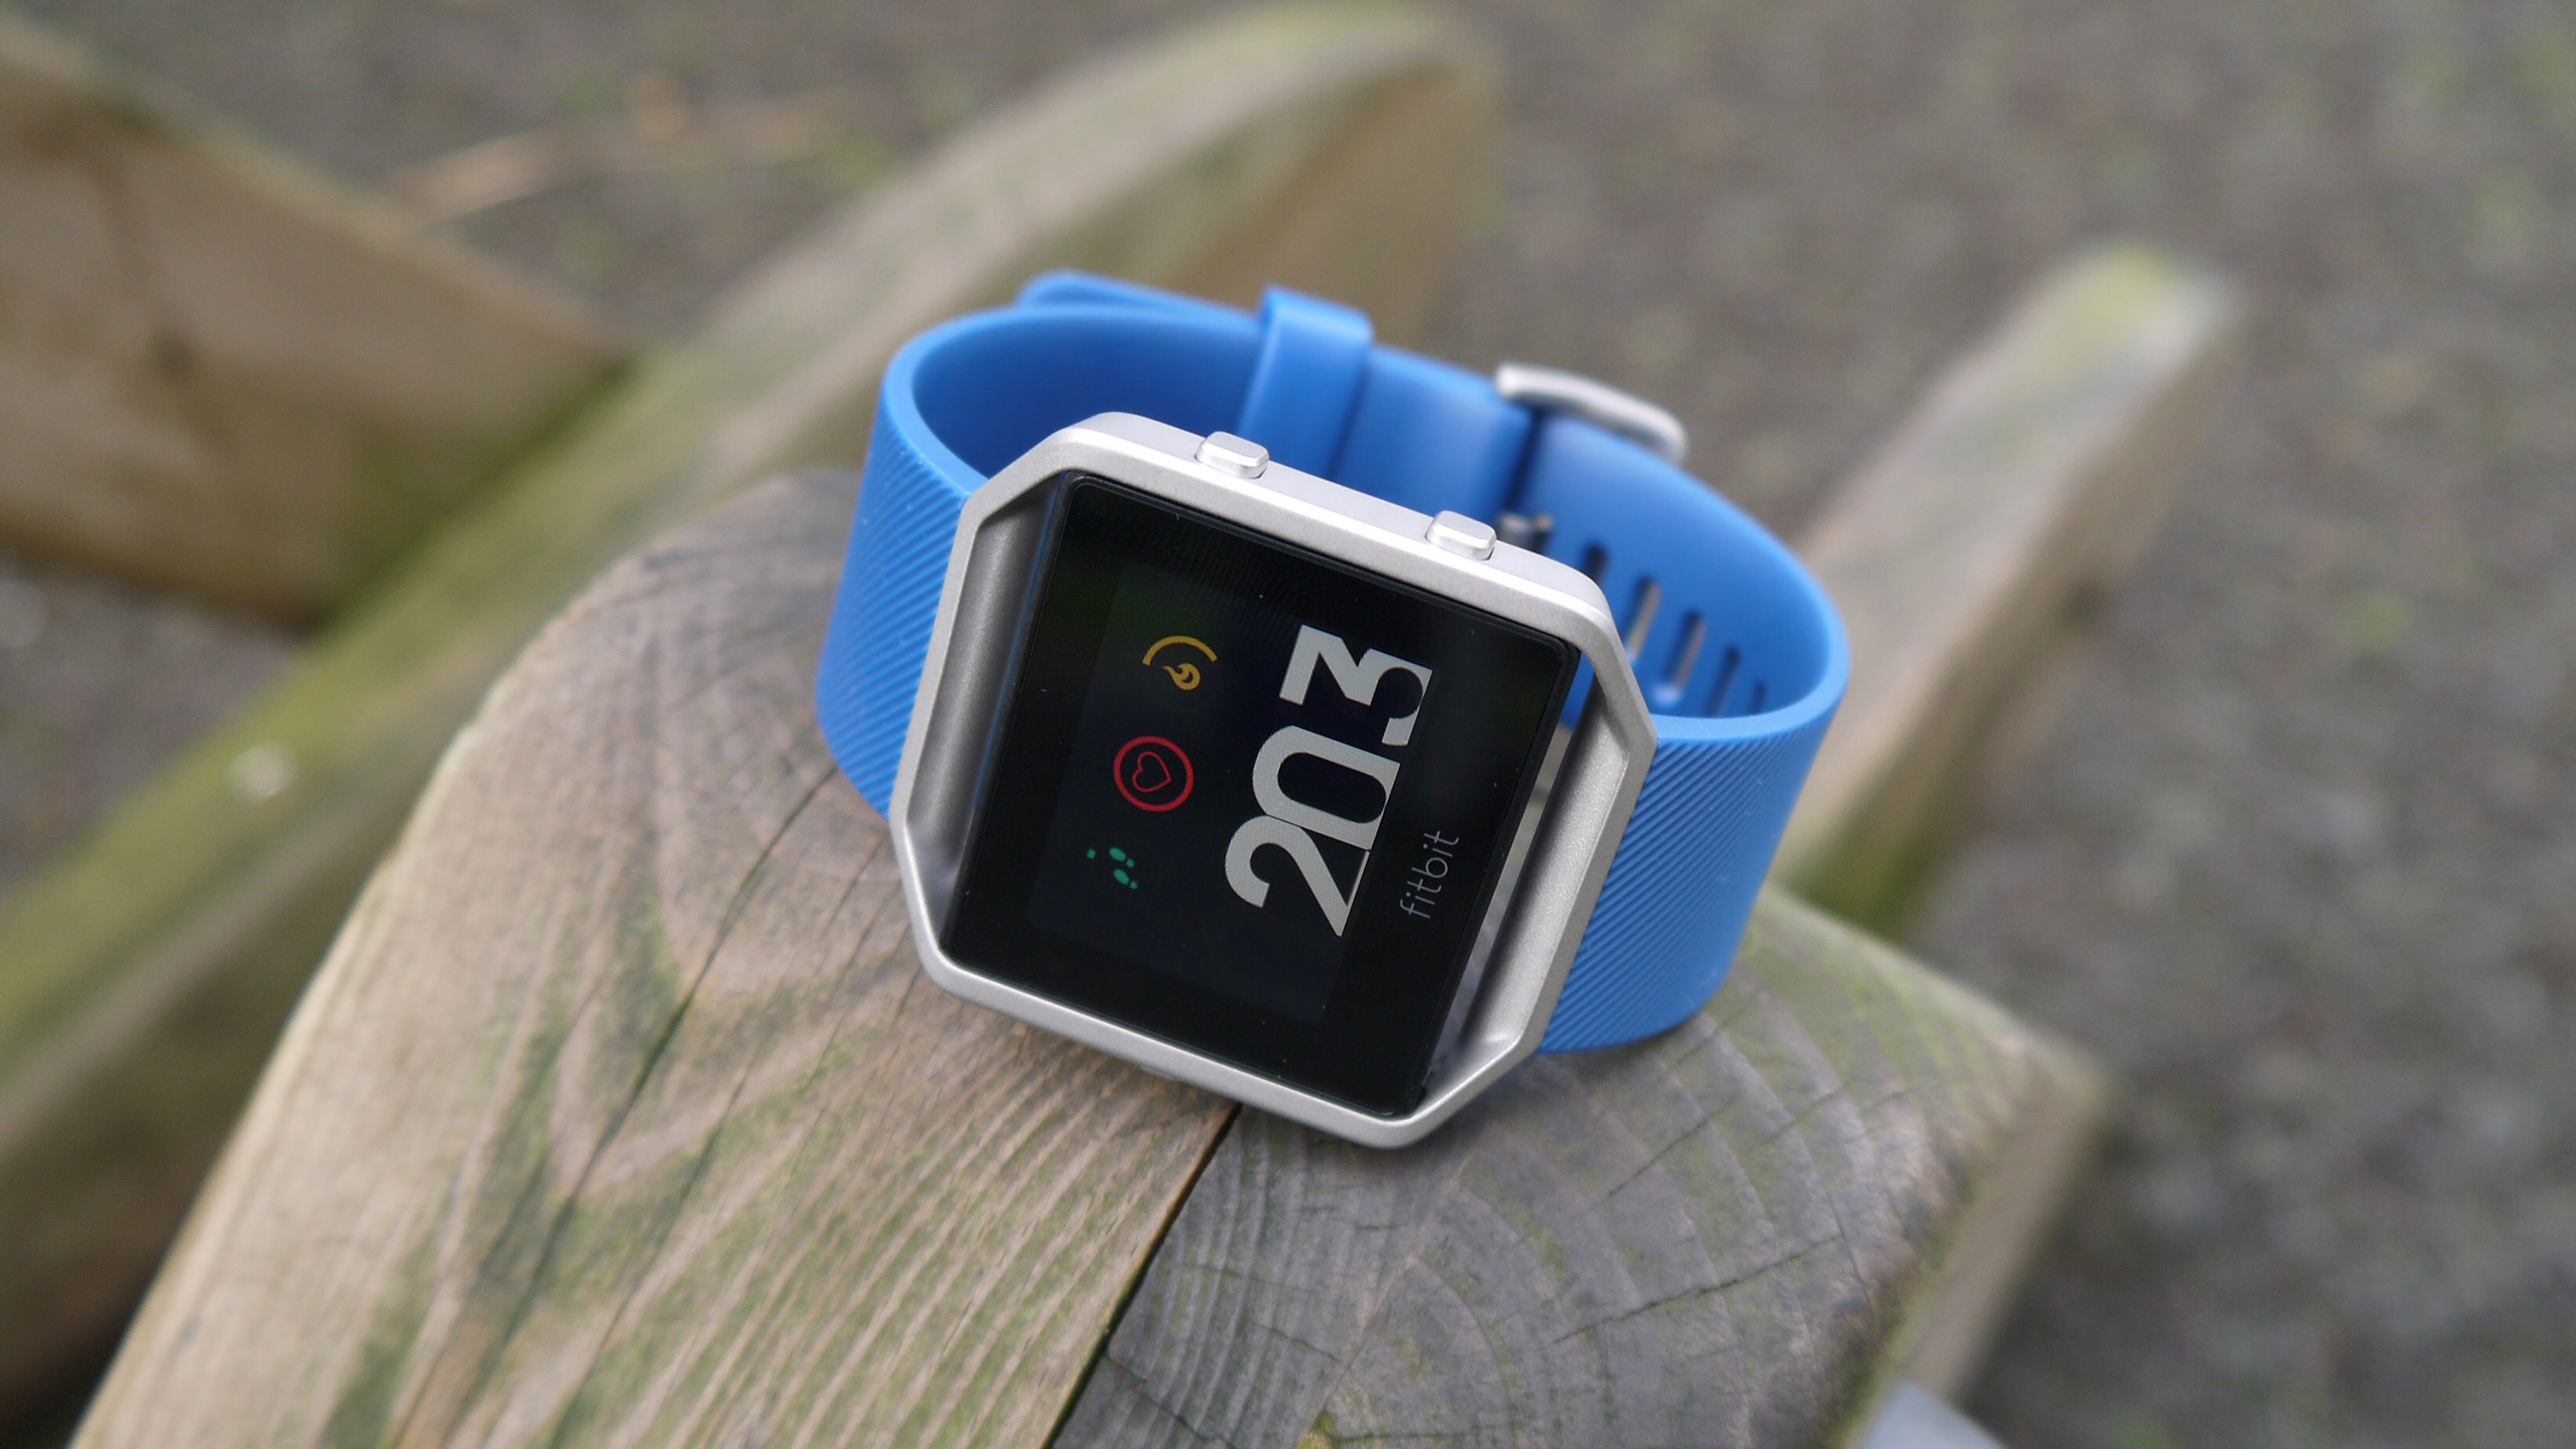 fitbit ionic 2 release date